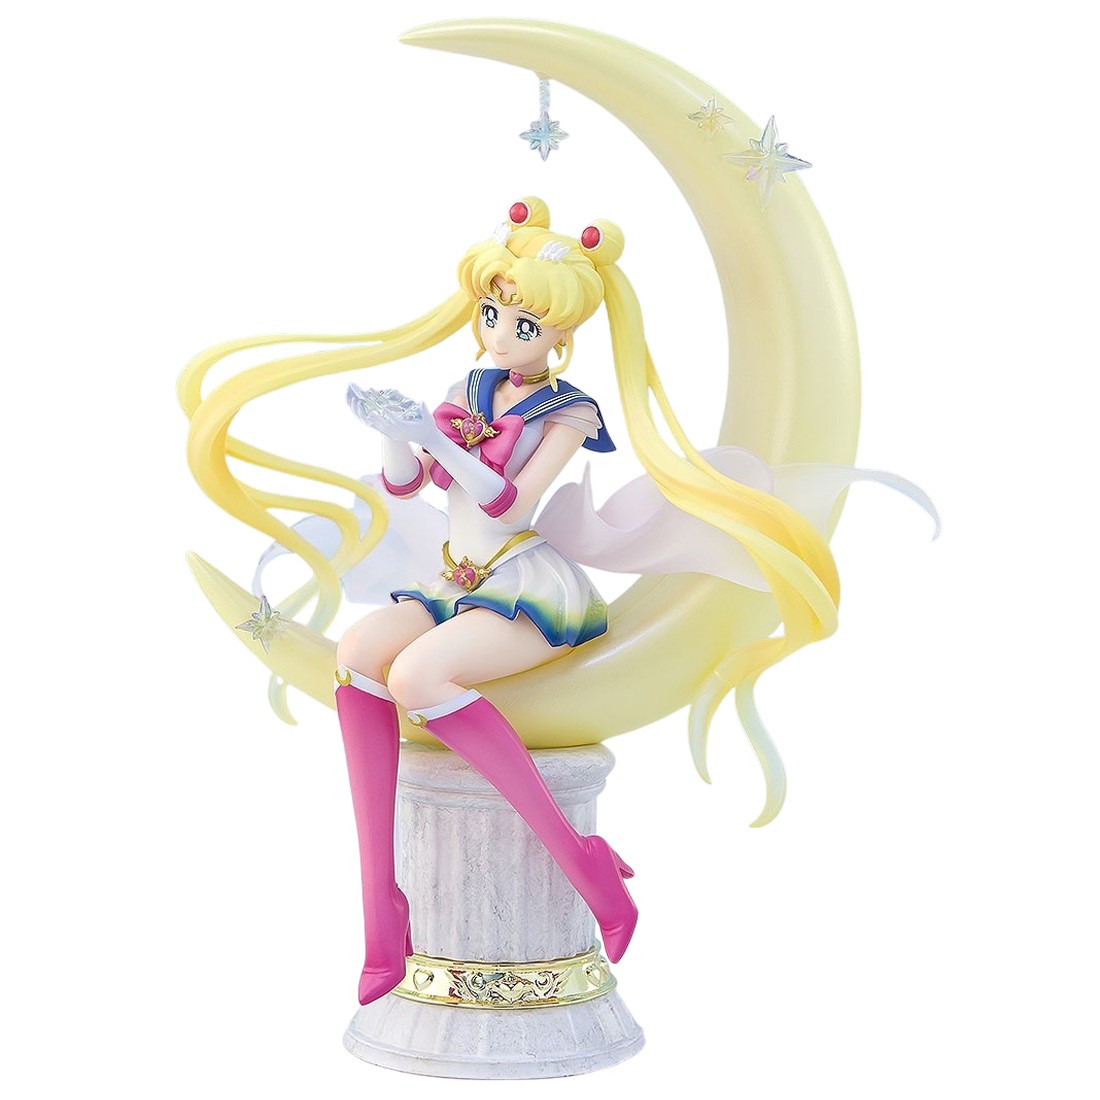 Bandai Figuarts Zero Chouette Pretty Guardian Sailor Moon Eternal The Movie  Super Sailor Moon Bright Moon And Legendary Silver Crystal Figure yellow